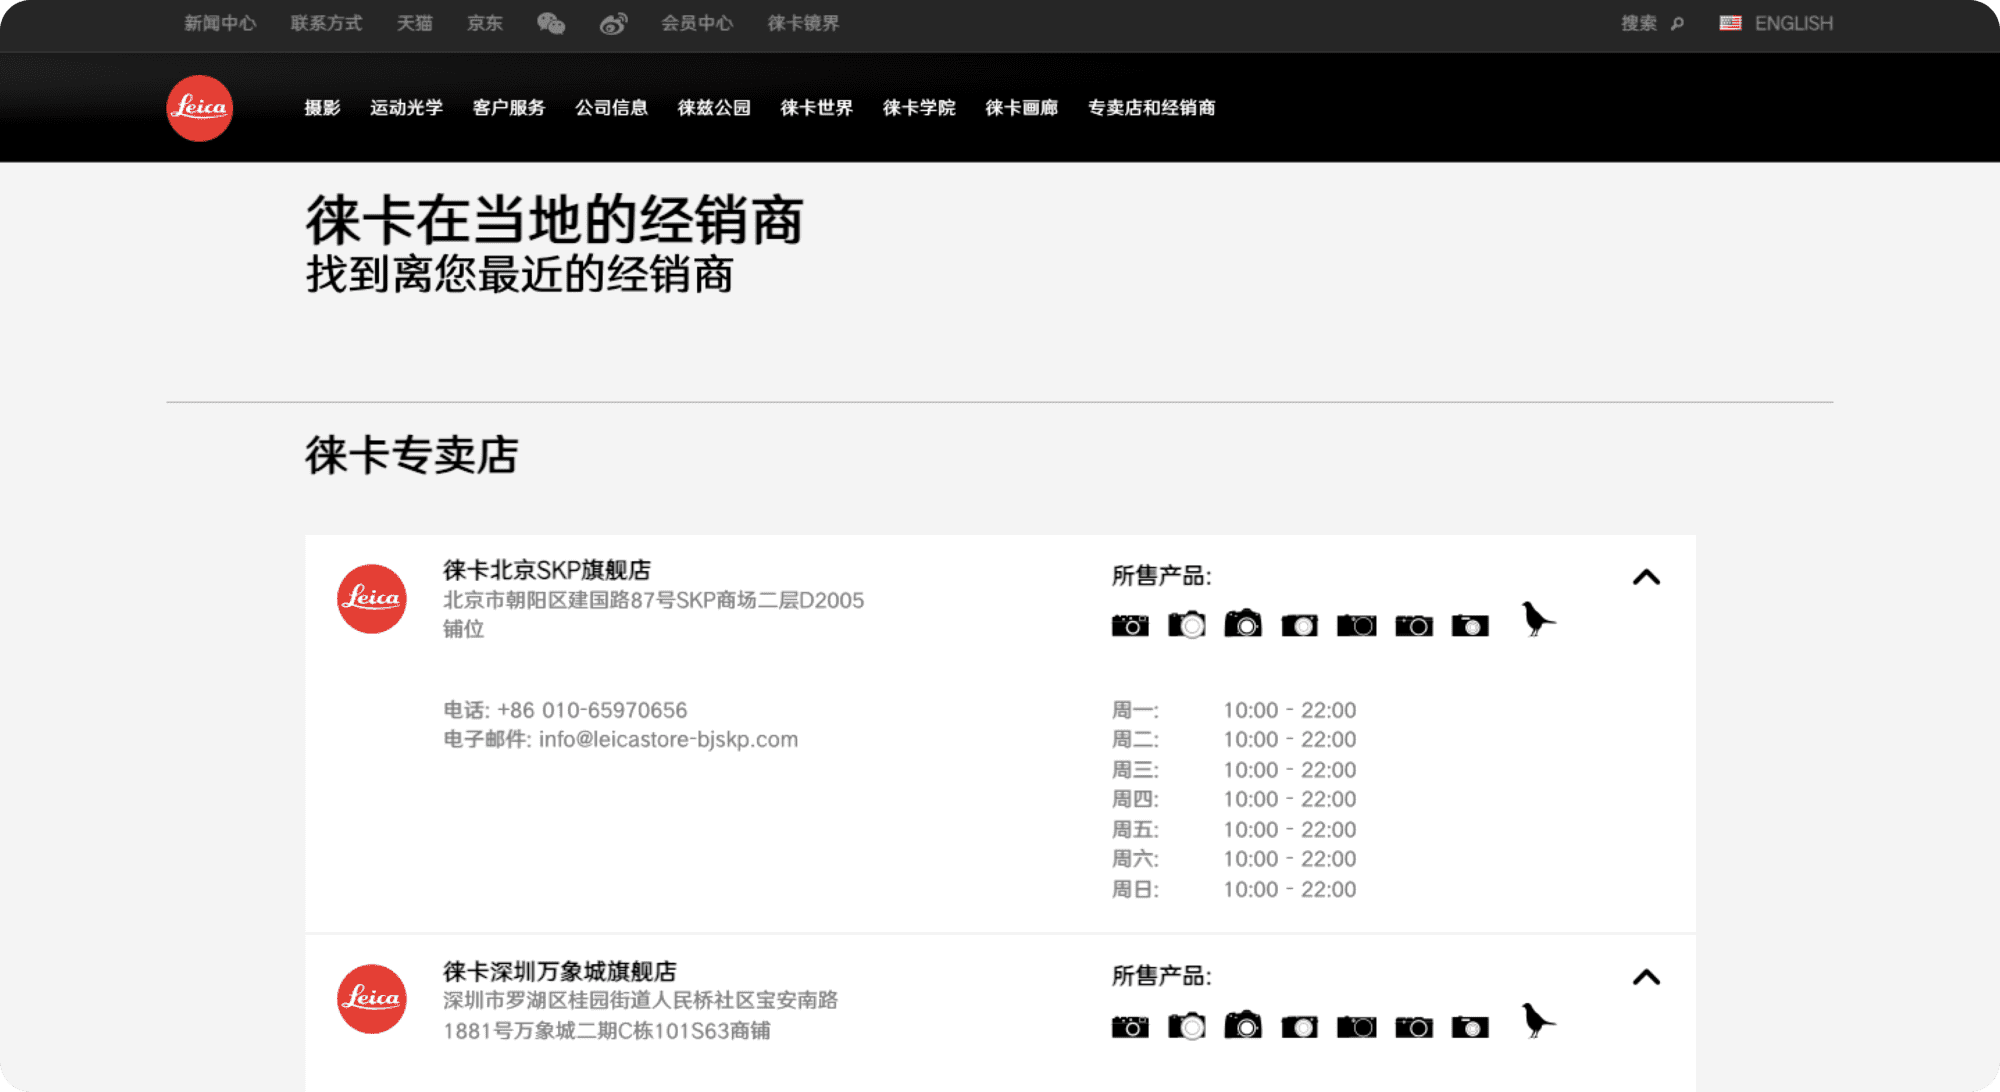 The Dealer Locator page of Leica China website also shows which products are available with adorable simplified icons